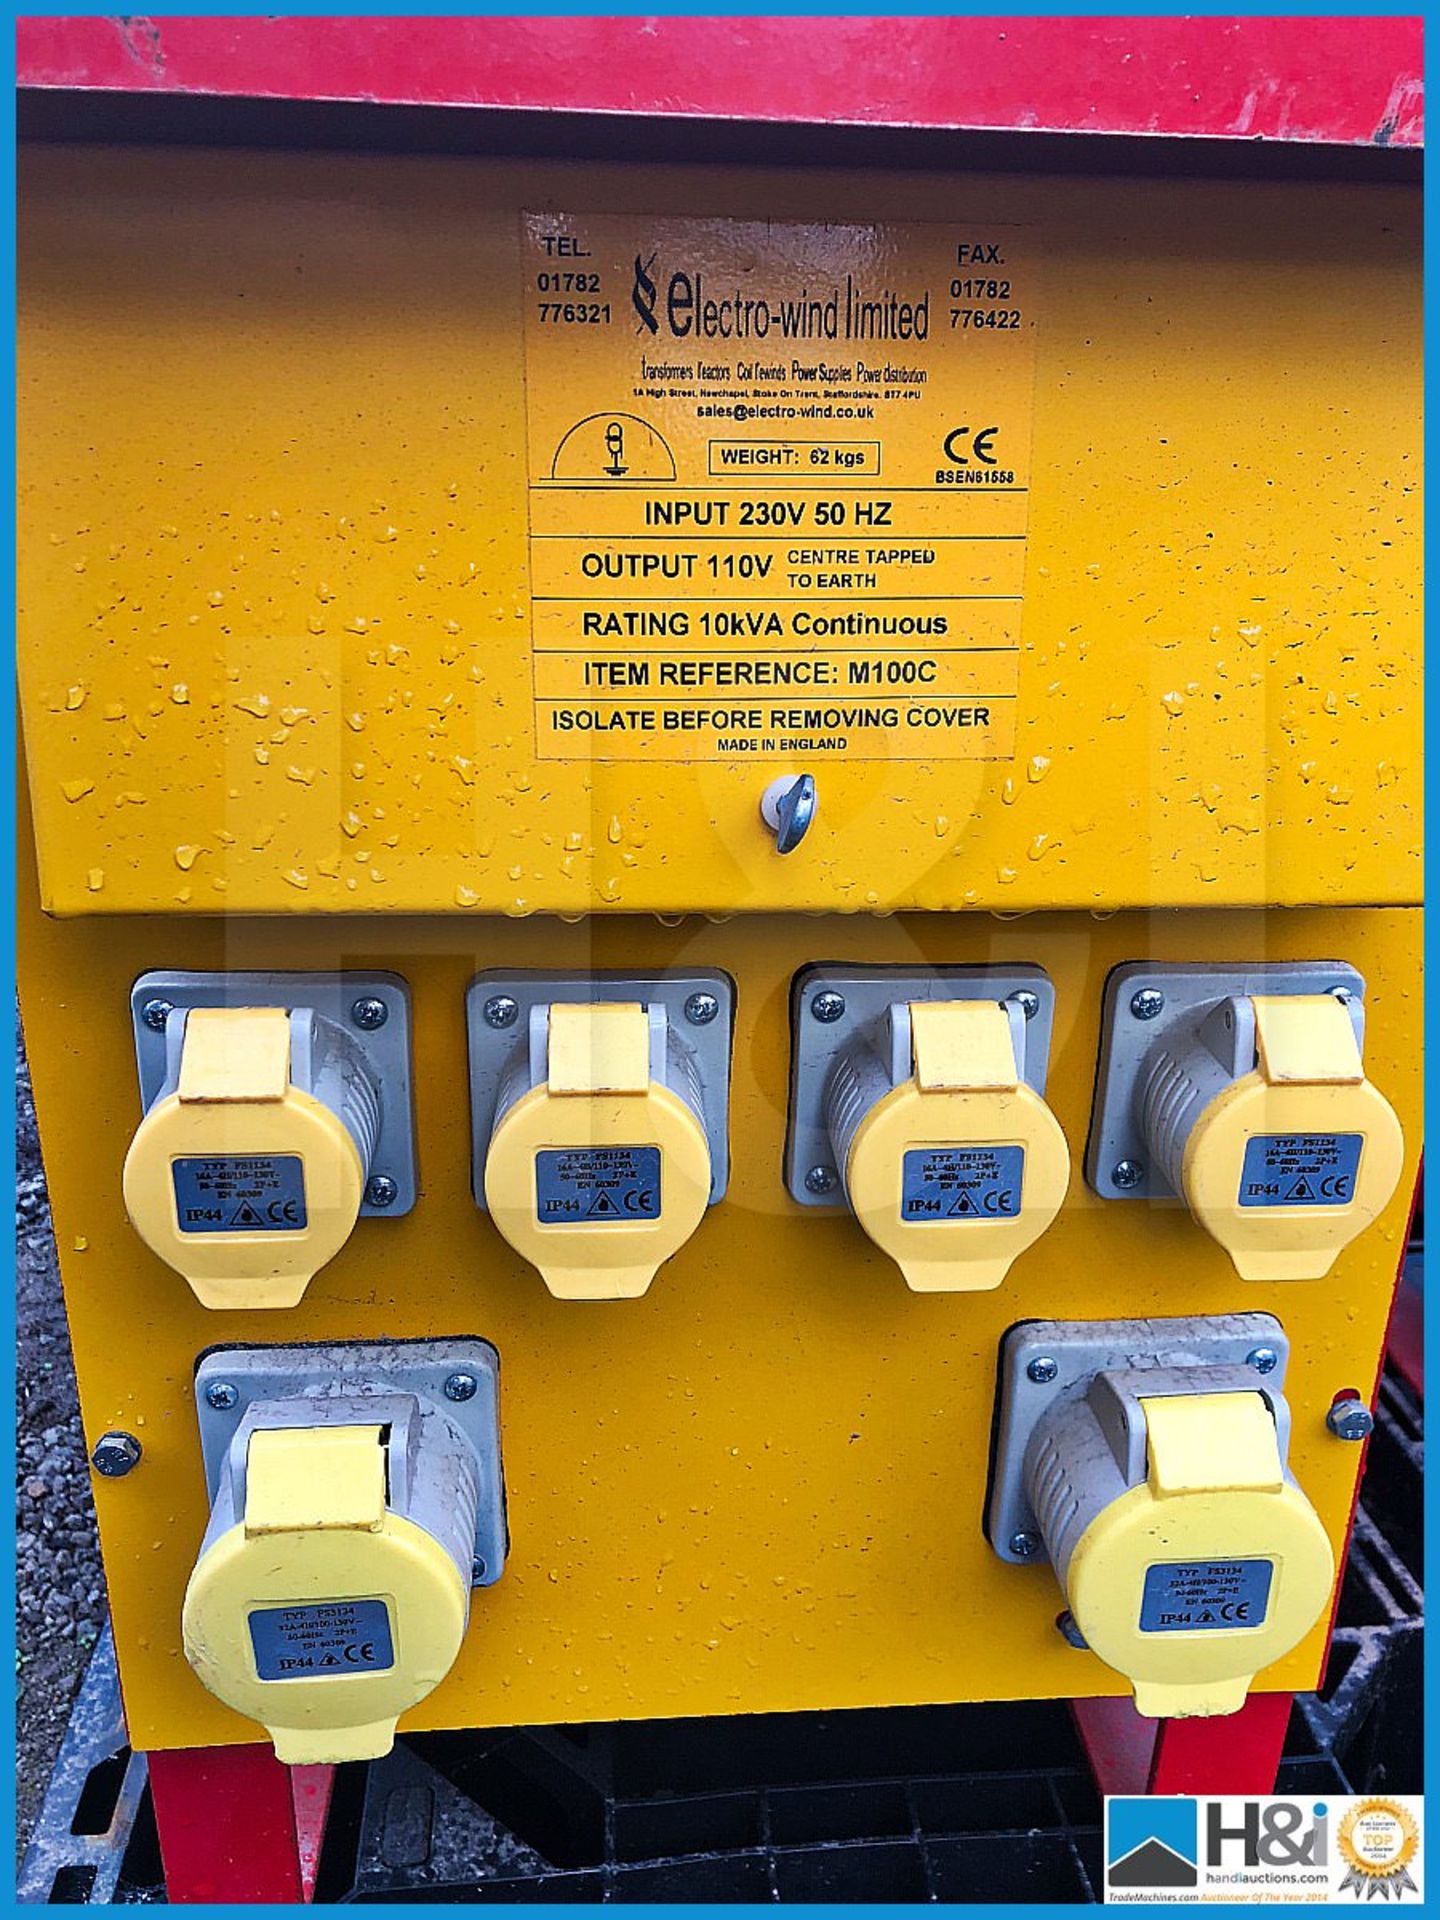 Single phase 240v to 110v site transformer. Appears to be in excellent condition - Image 2 of 3